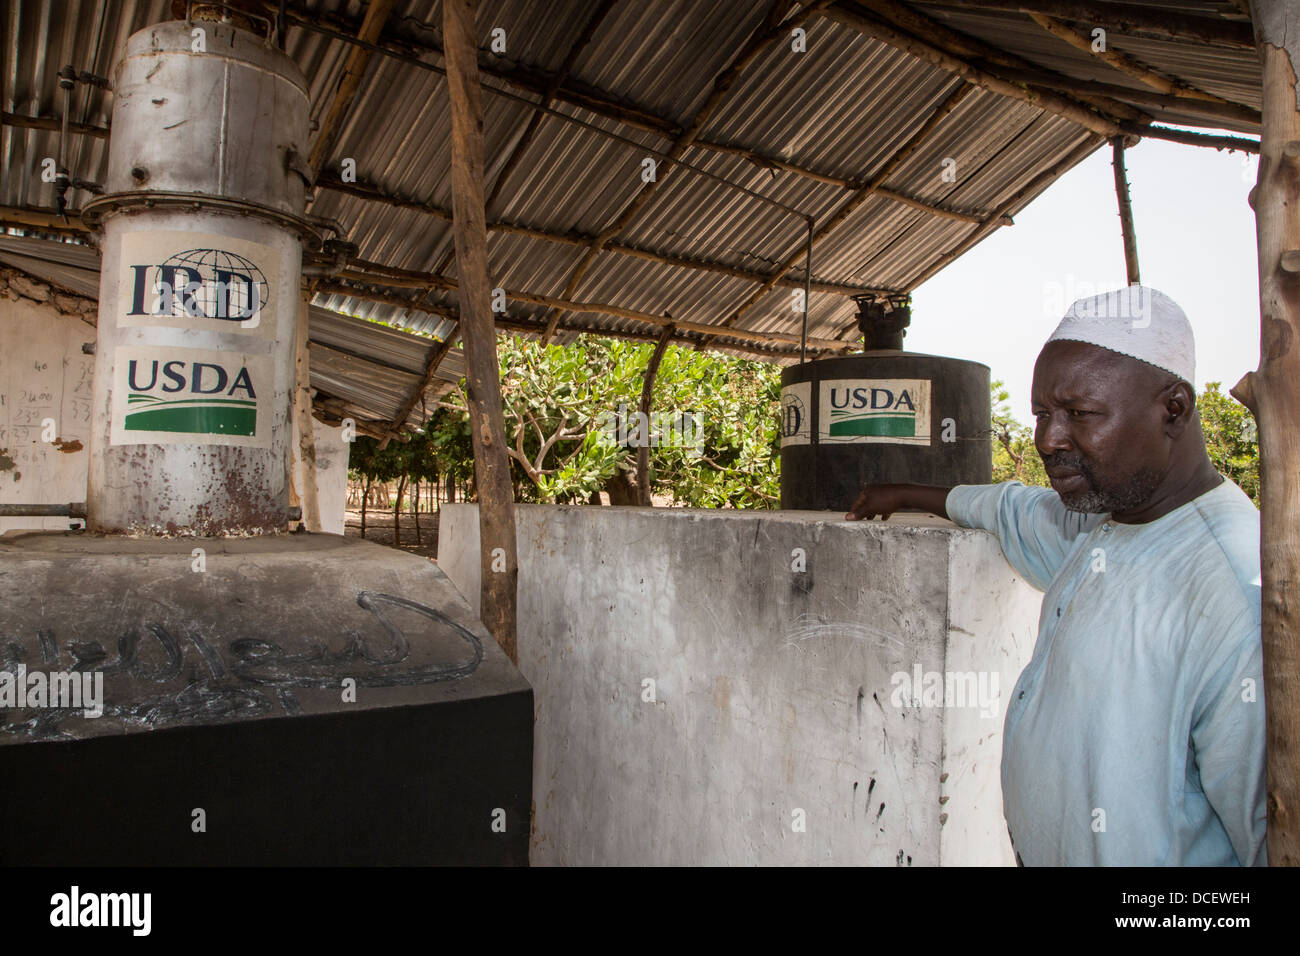 Cashew Nut Farmer with Boiler for Drying Nuts. Mendy Kunda, North Bank Region, The Gambia Stock Photo